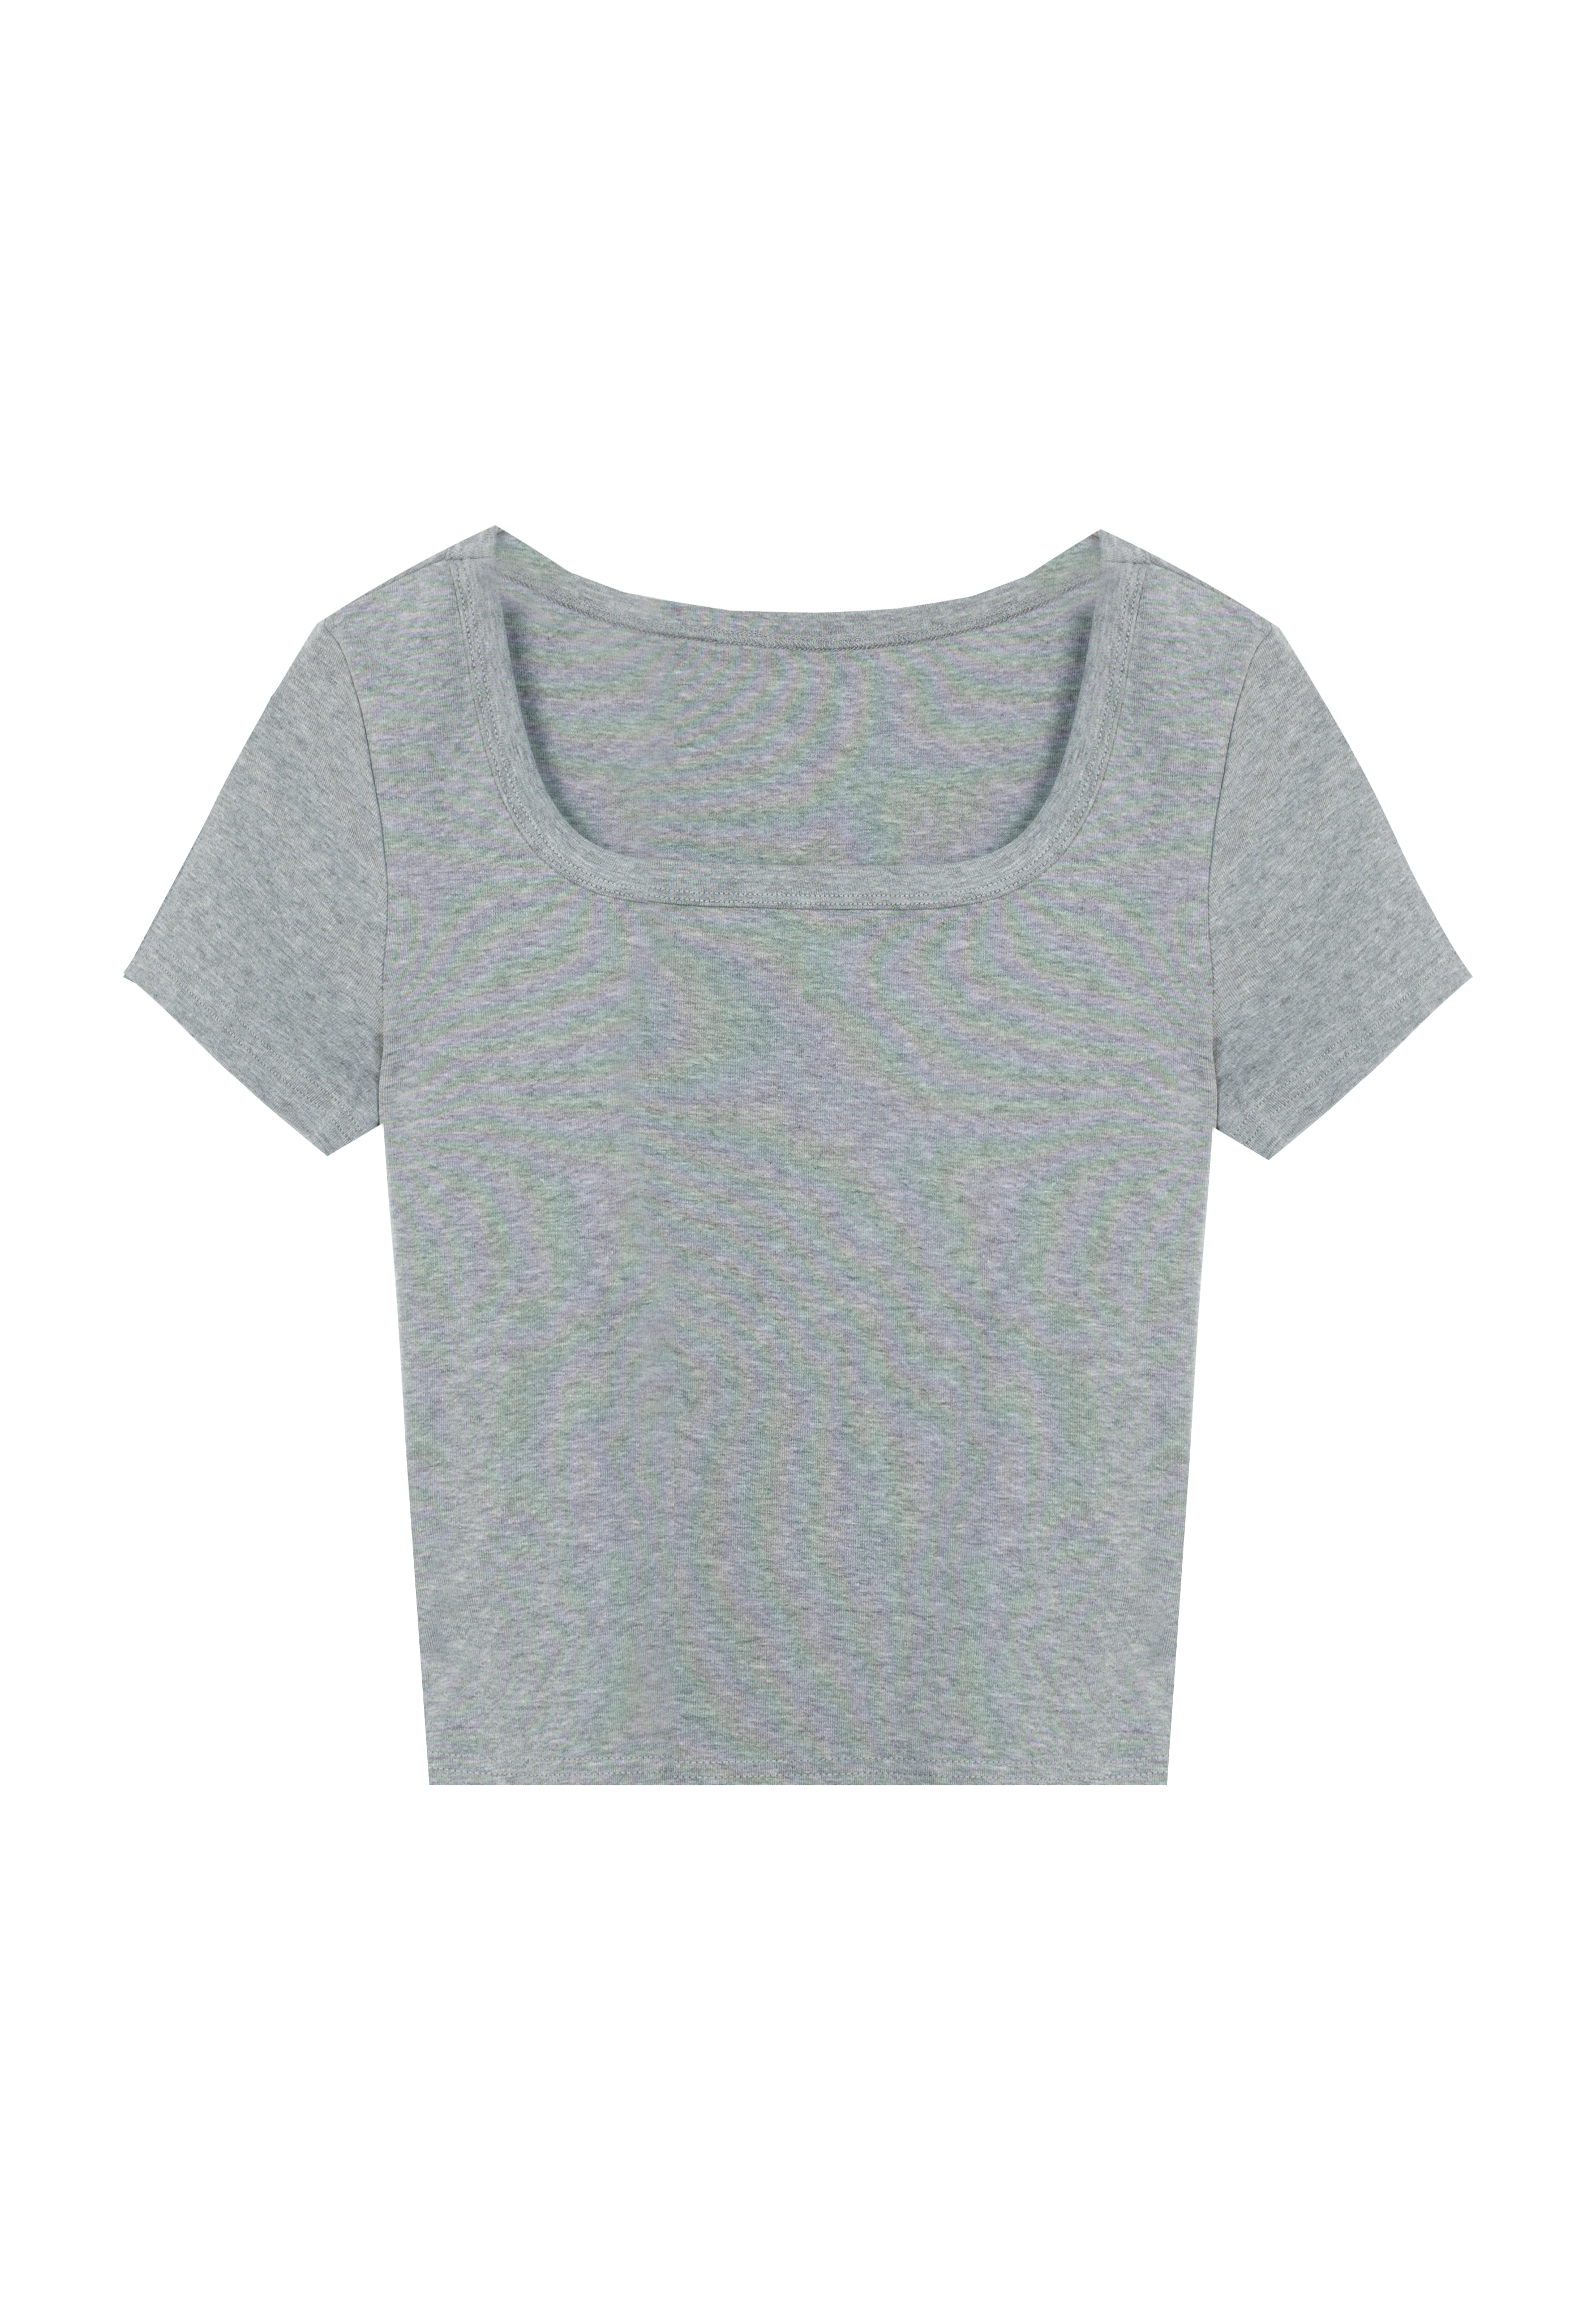 Women's Short Sleeve Fitted Crop Top